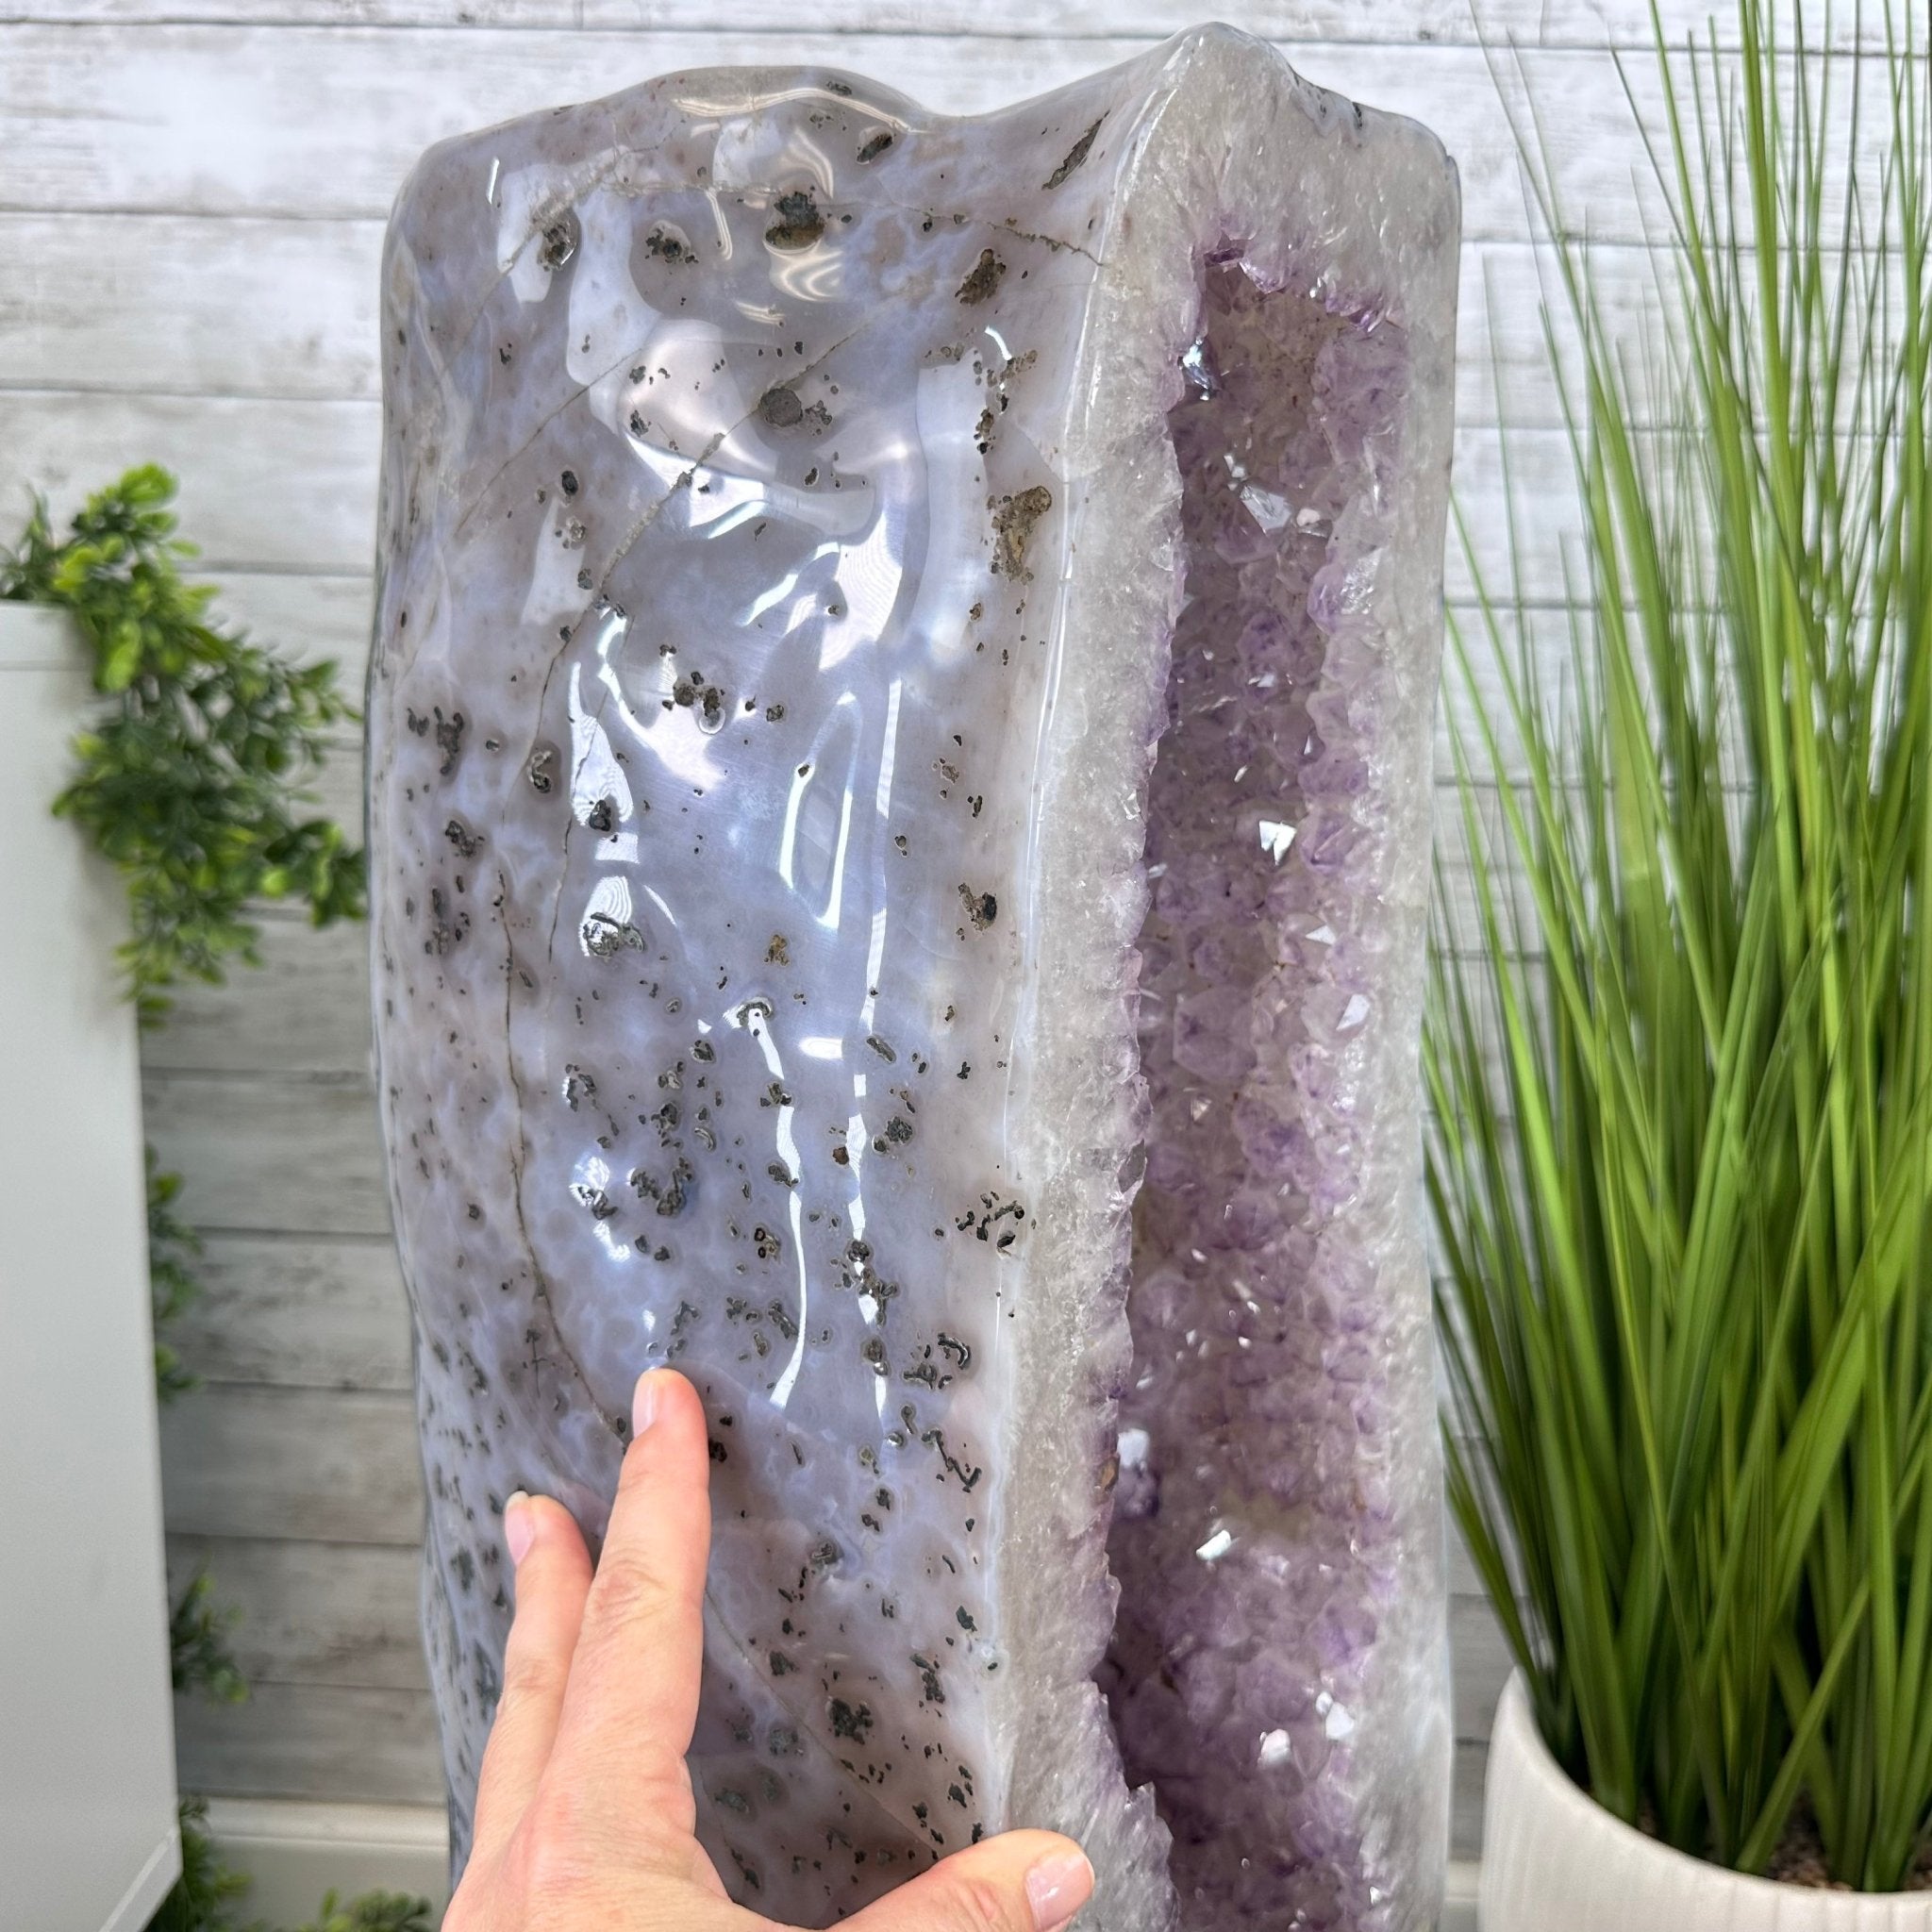 Extra Quality Polished Brazilian Amethyst Cathedral, 150.6 lbs & 35.25" tall Model #5602-0184 by Brazil Gems - Brazil GemsBrazil GemsExtra Quality Polished Brazilian Amethyst Cathedral, 150.6 lbs & 35.25" tall Model #5602-0184 by Brazil GemsPolished Cathedrals5602-0184